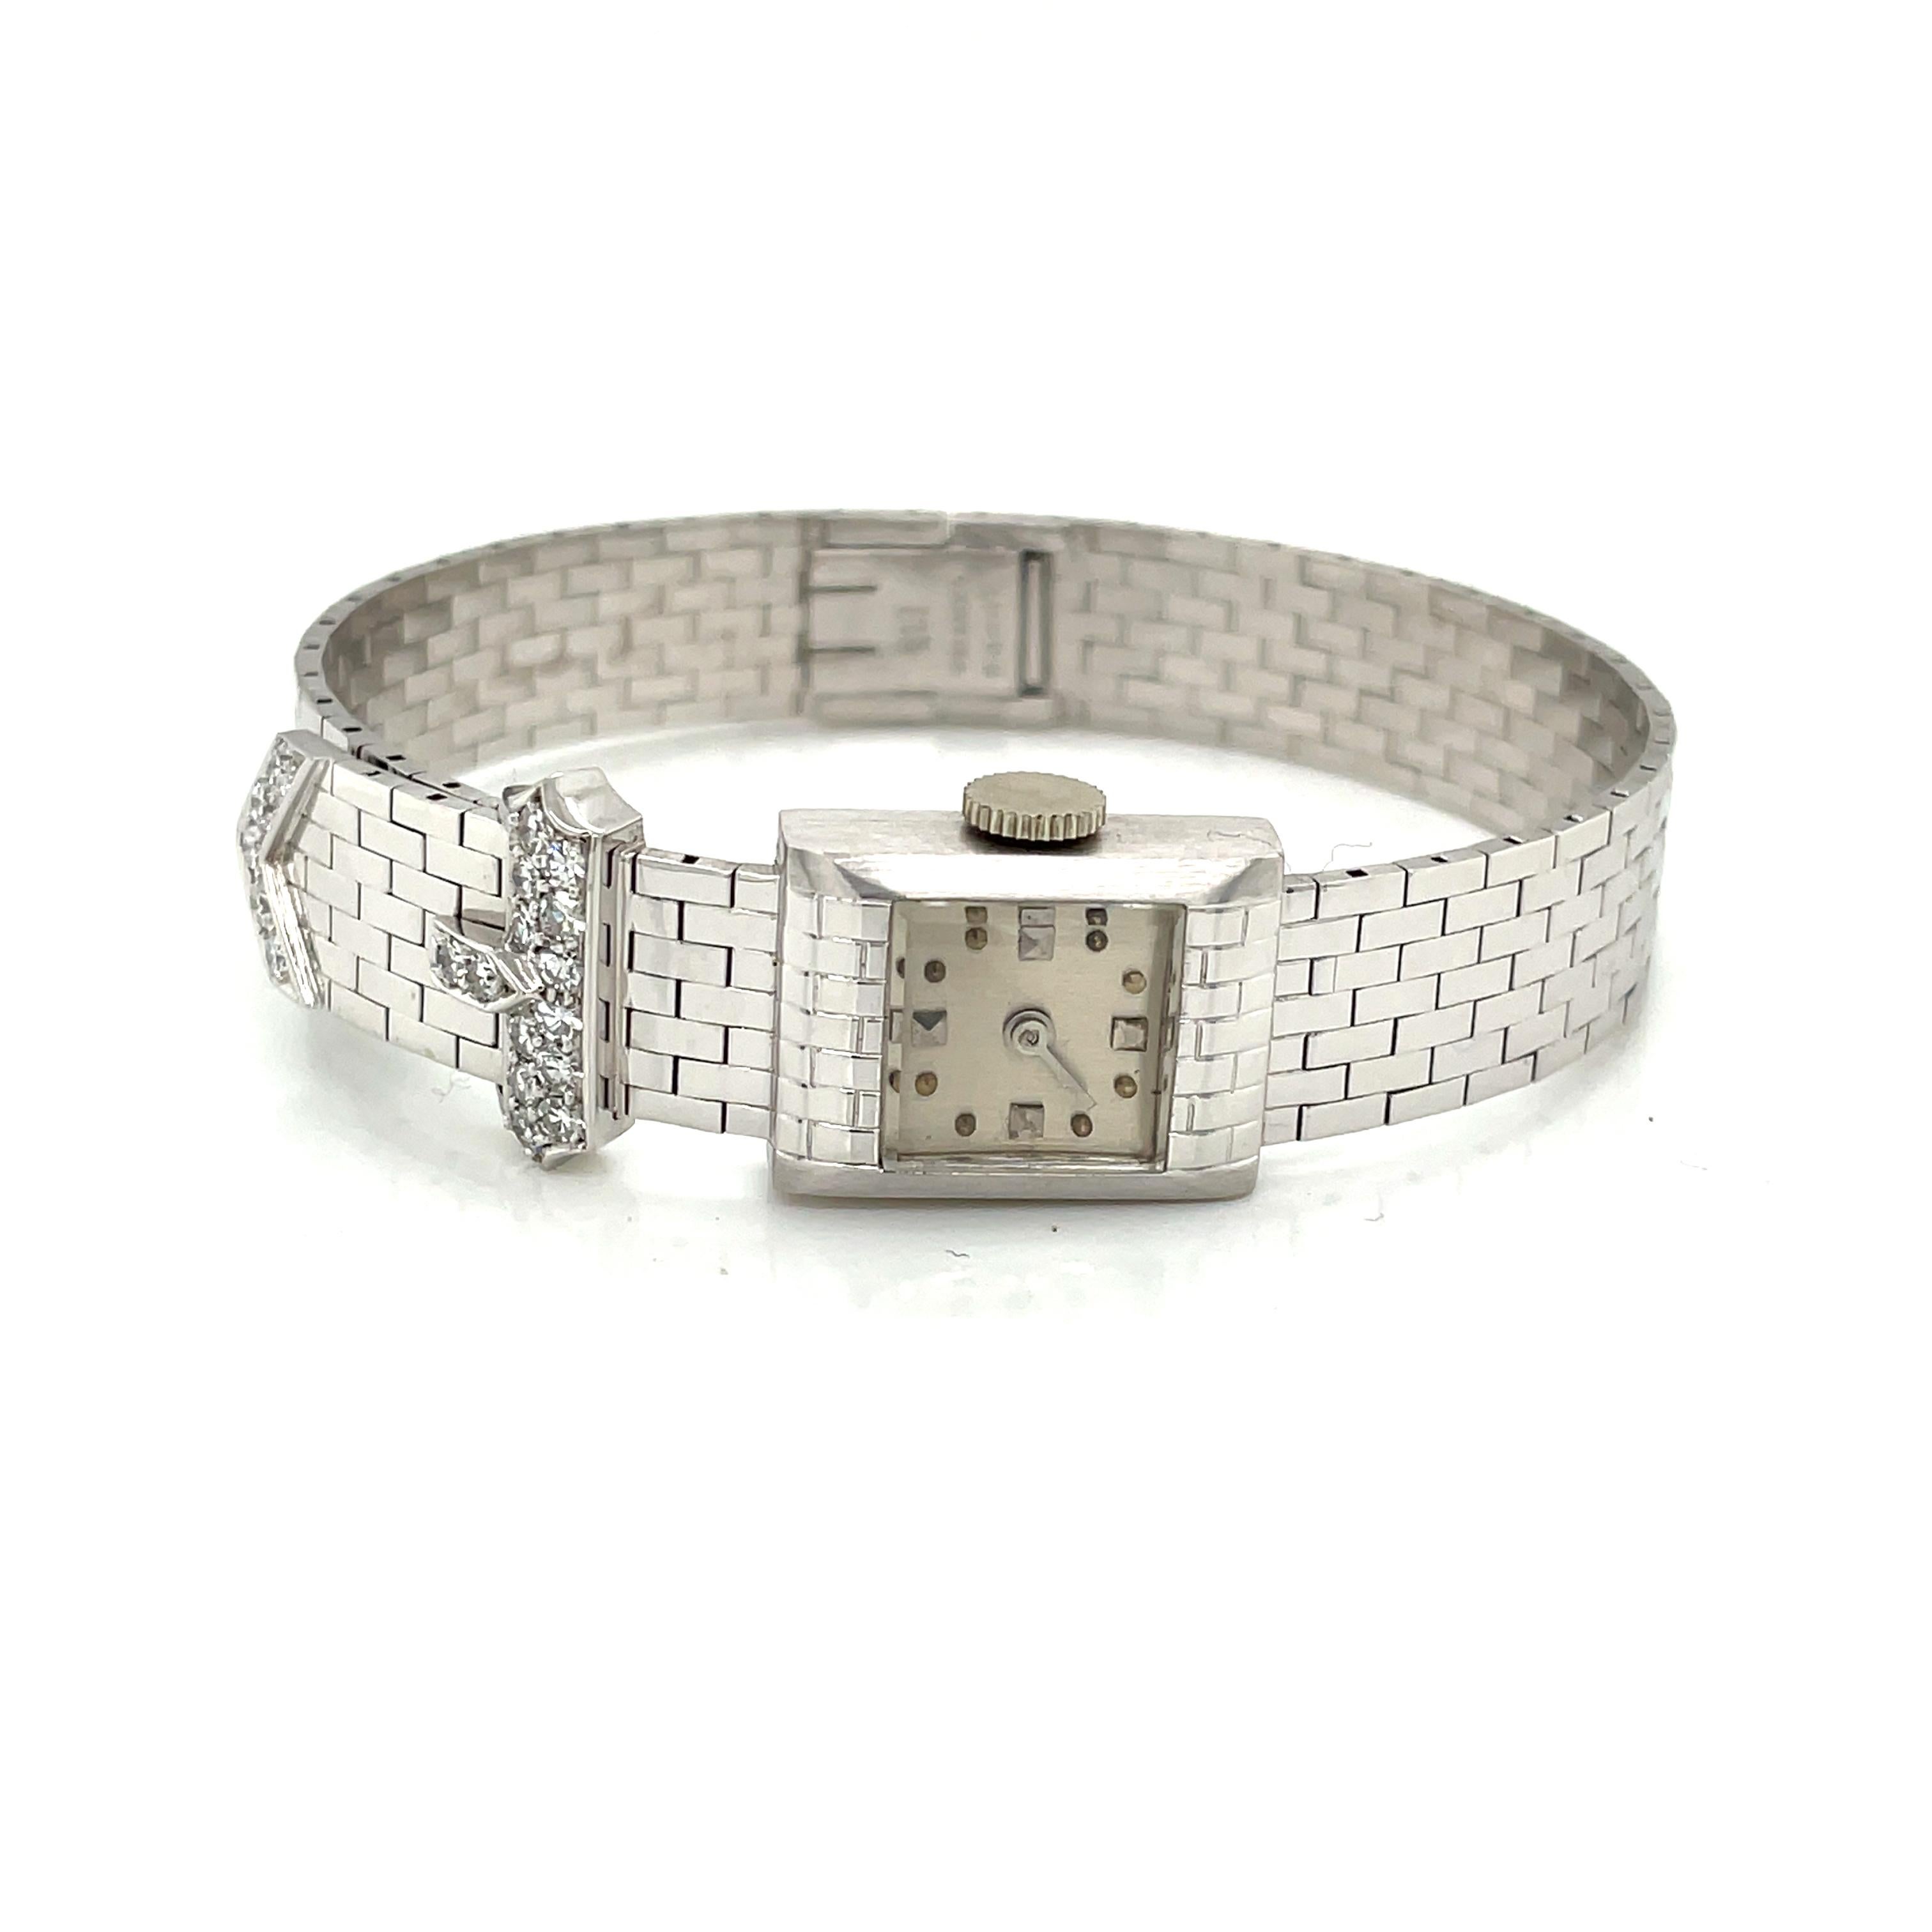 Exquisite diamond accented vintage Cartier, this Art Deco 14 karat white gold bracelet hosts a Concord 17 jeweled manual wind movement CXC watch
with satin white gold C&B watch case #2546 and Cartier buckle clasp 19902. A buckle inspired accent is